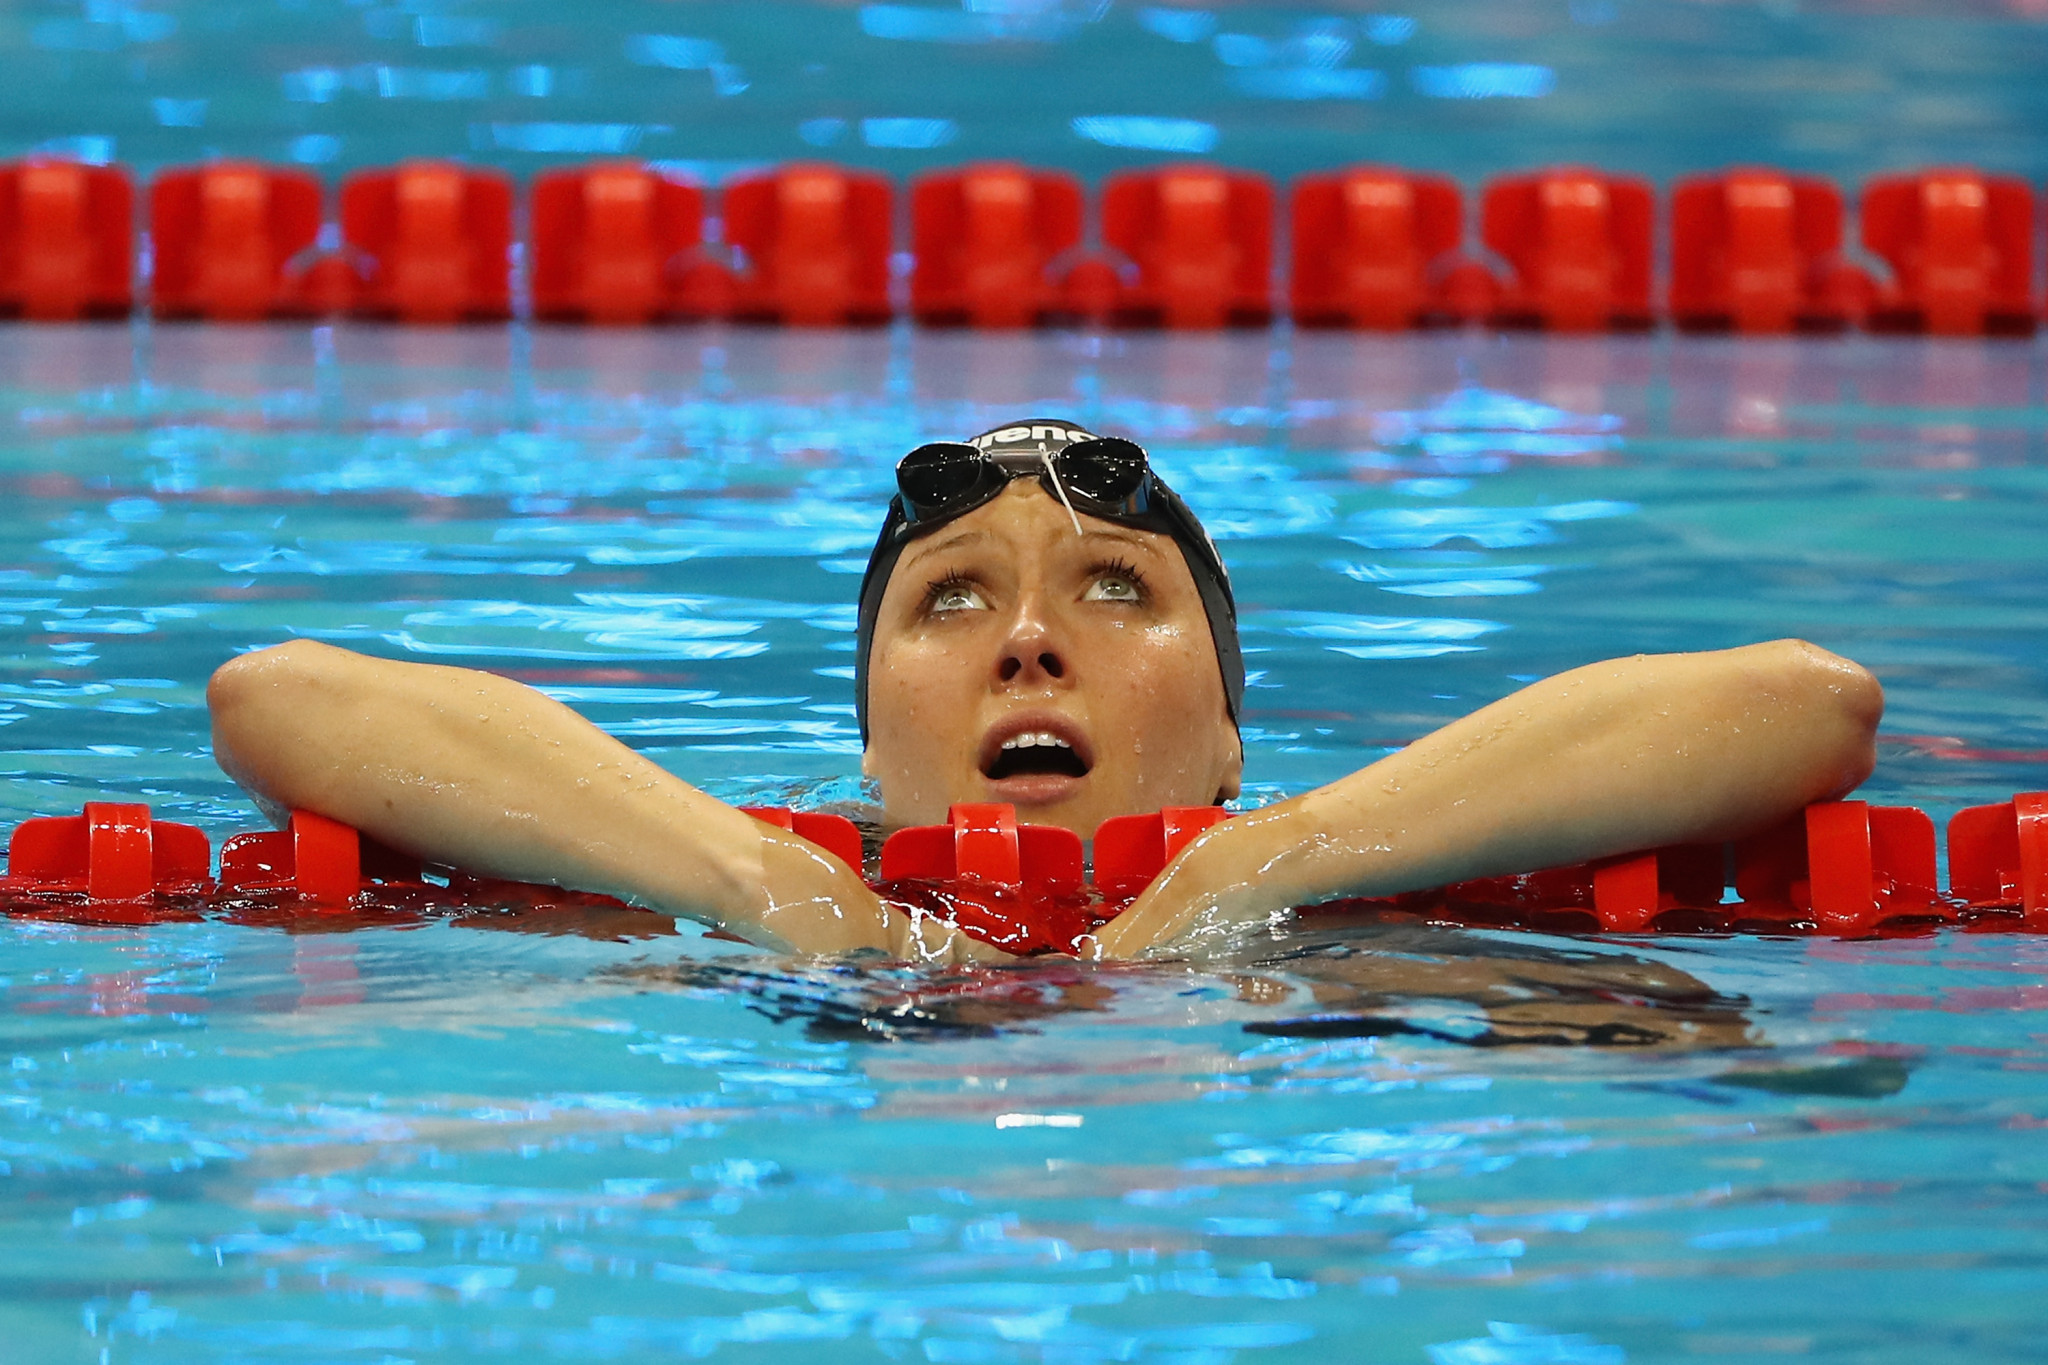 Long secures ninth gold as World Para Swimming Championships conclude in Mexico City